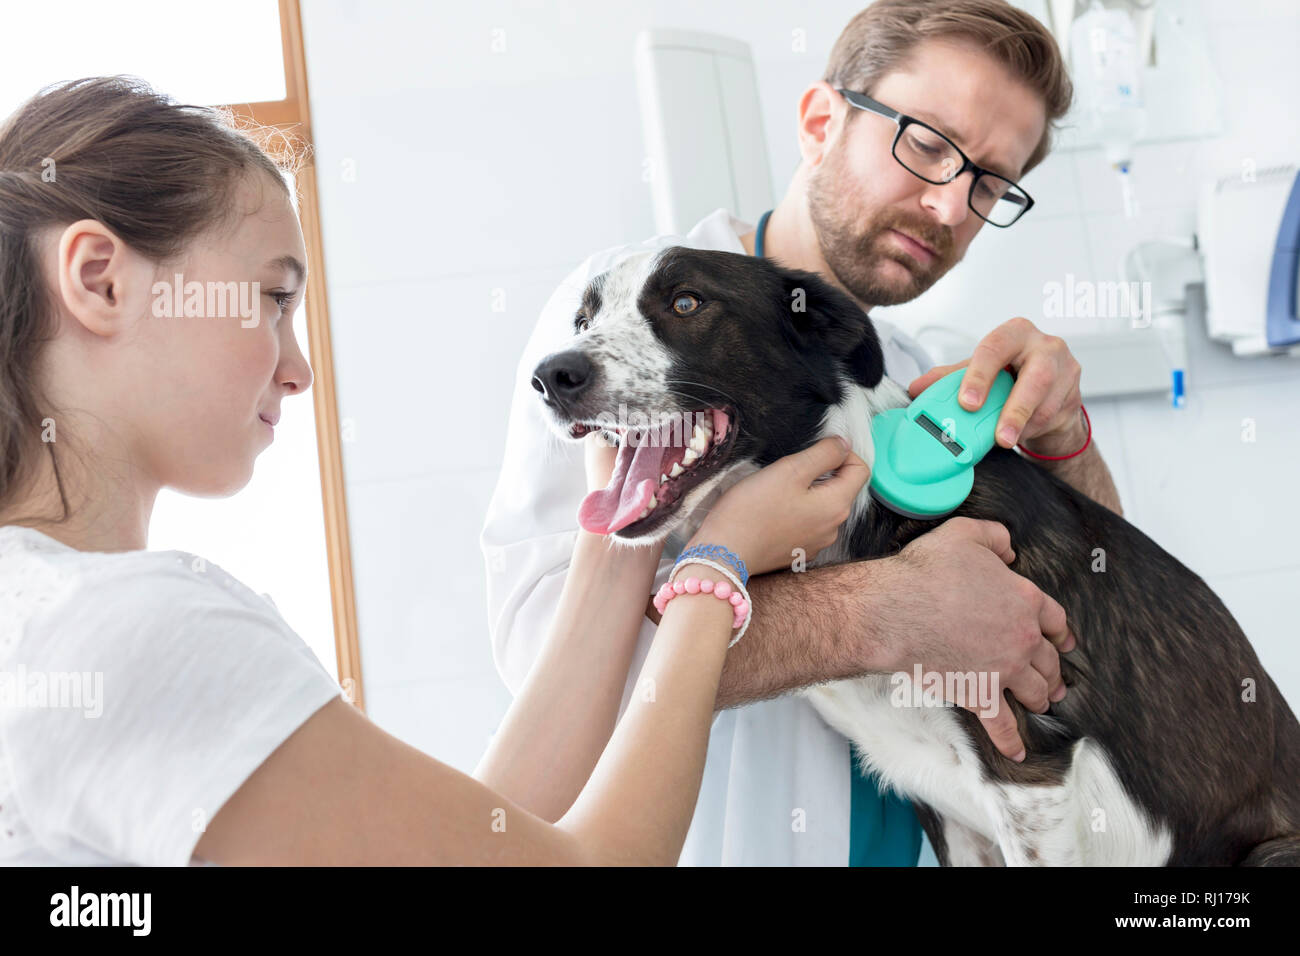 Girl looking while doctor using equipment on dog at veterinary clinic Stock Photo